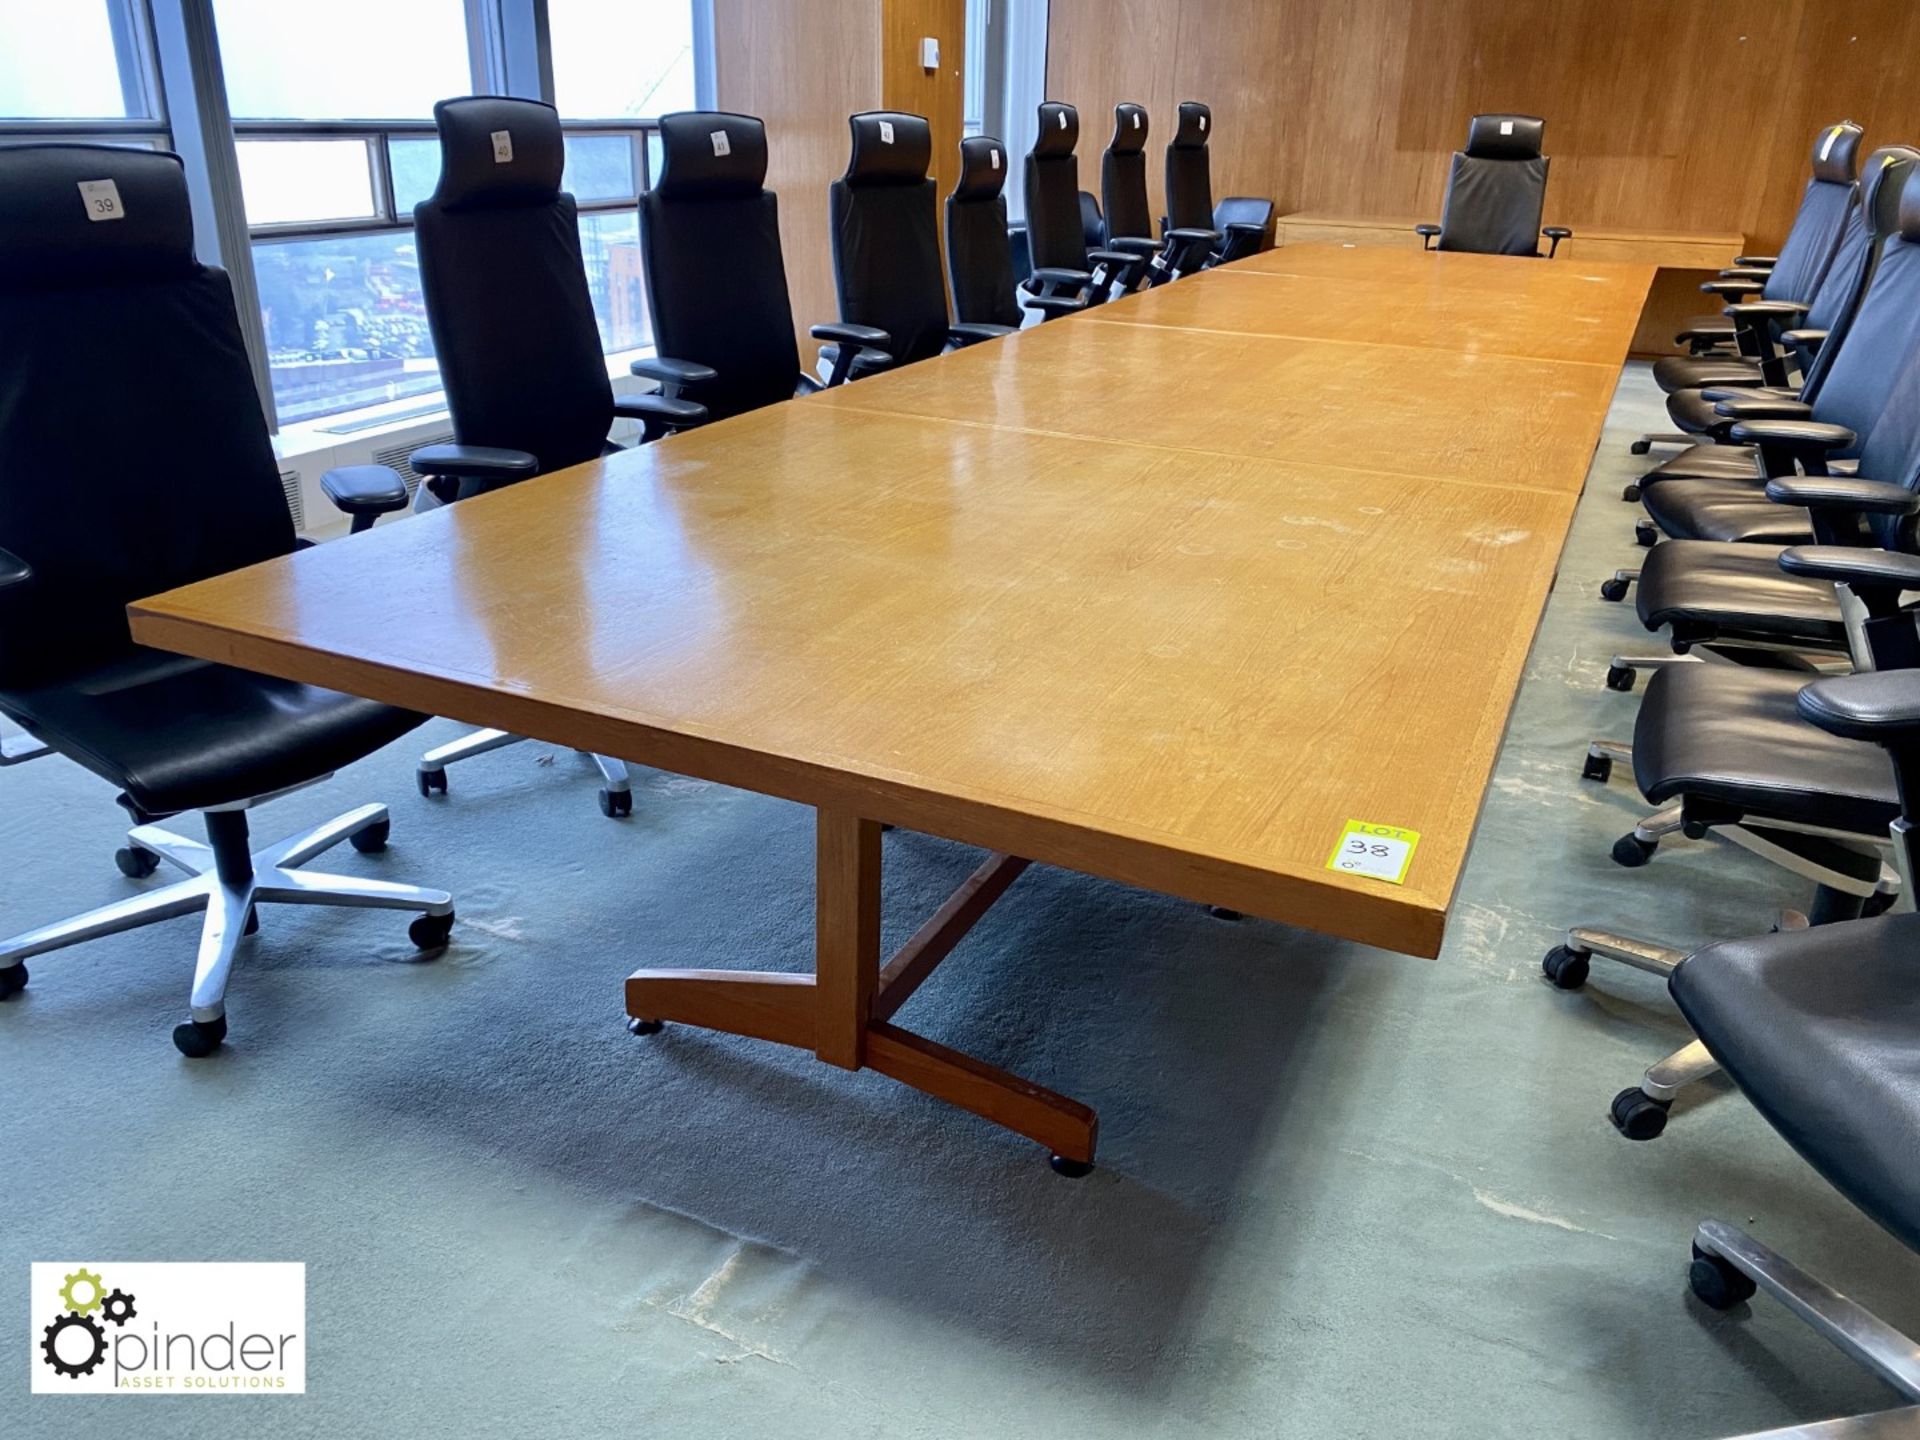 Oak 4-section Meeting Table, 6400mm x 1590mm (located in Meeting Room 13 on 23rd Floor) - Image 2 of 6